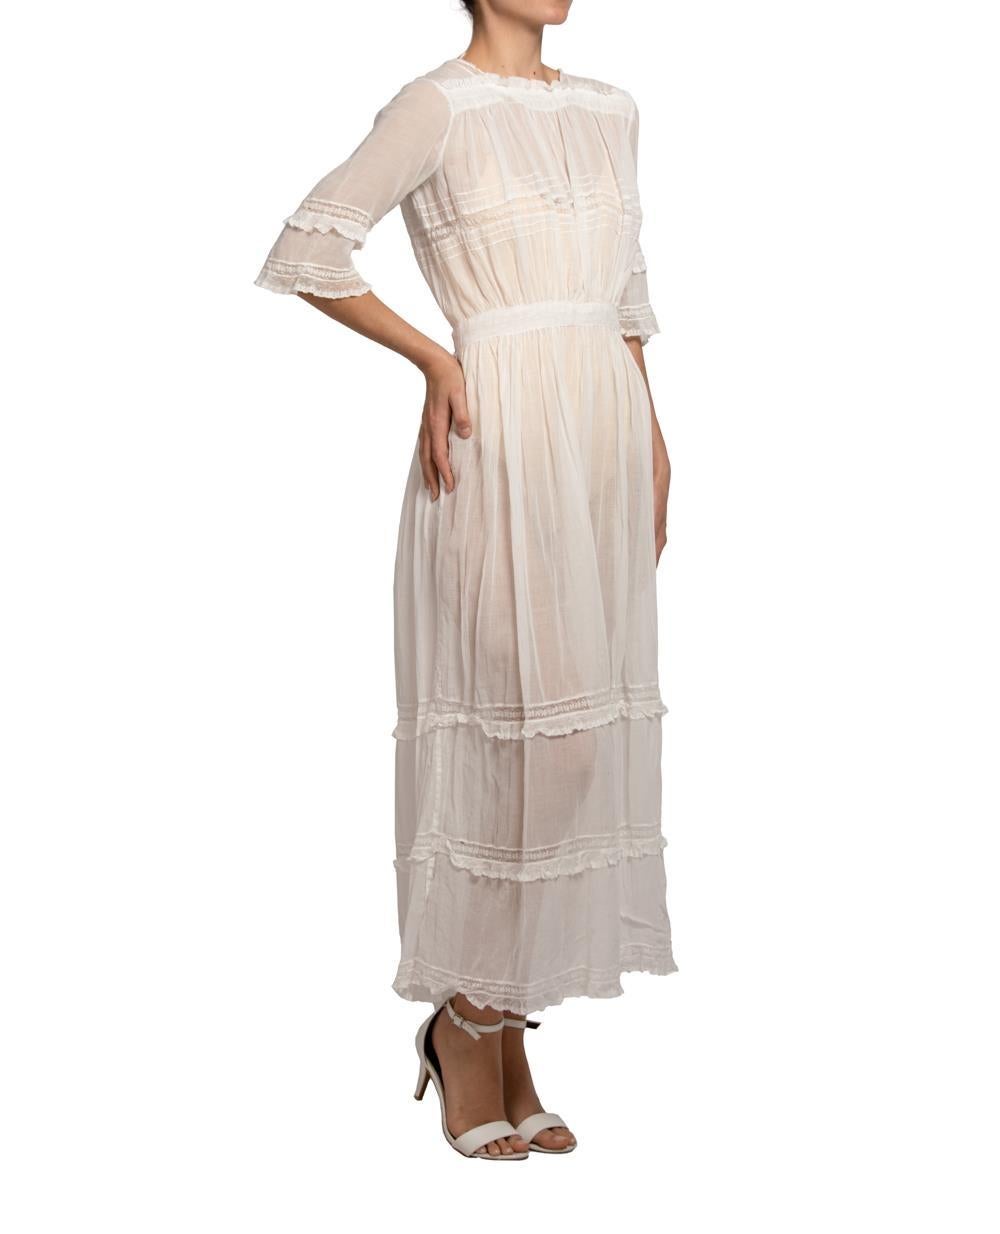 Edwardian White Organic Cotton Dress With Beautiful Lave Trim Detail For Sale 1